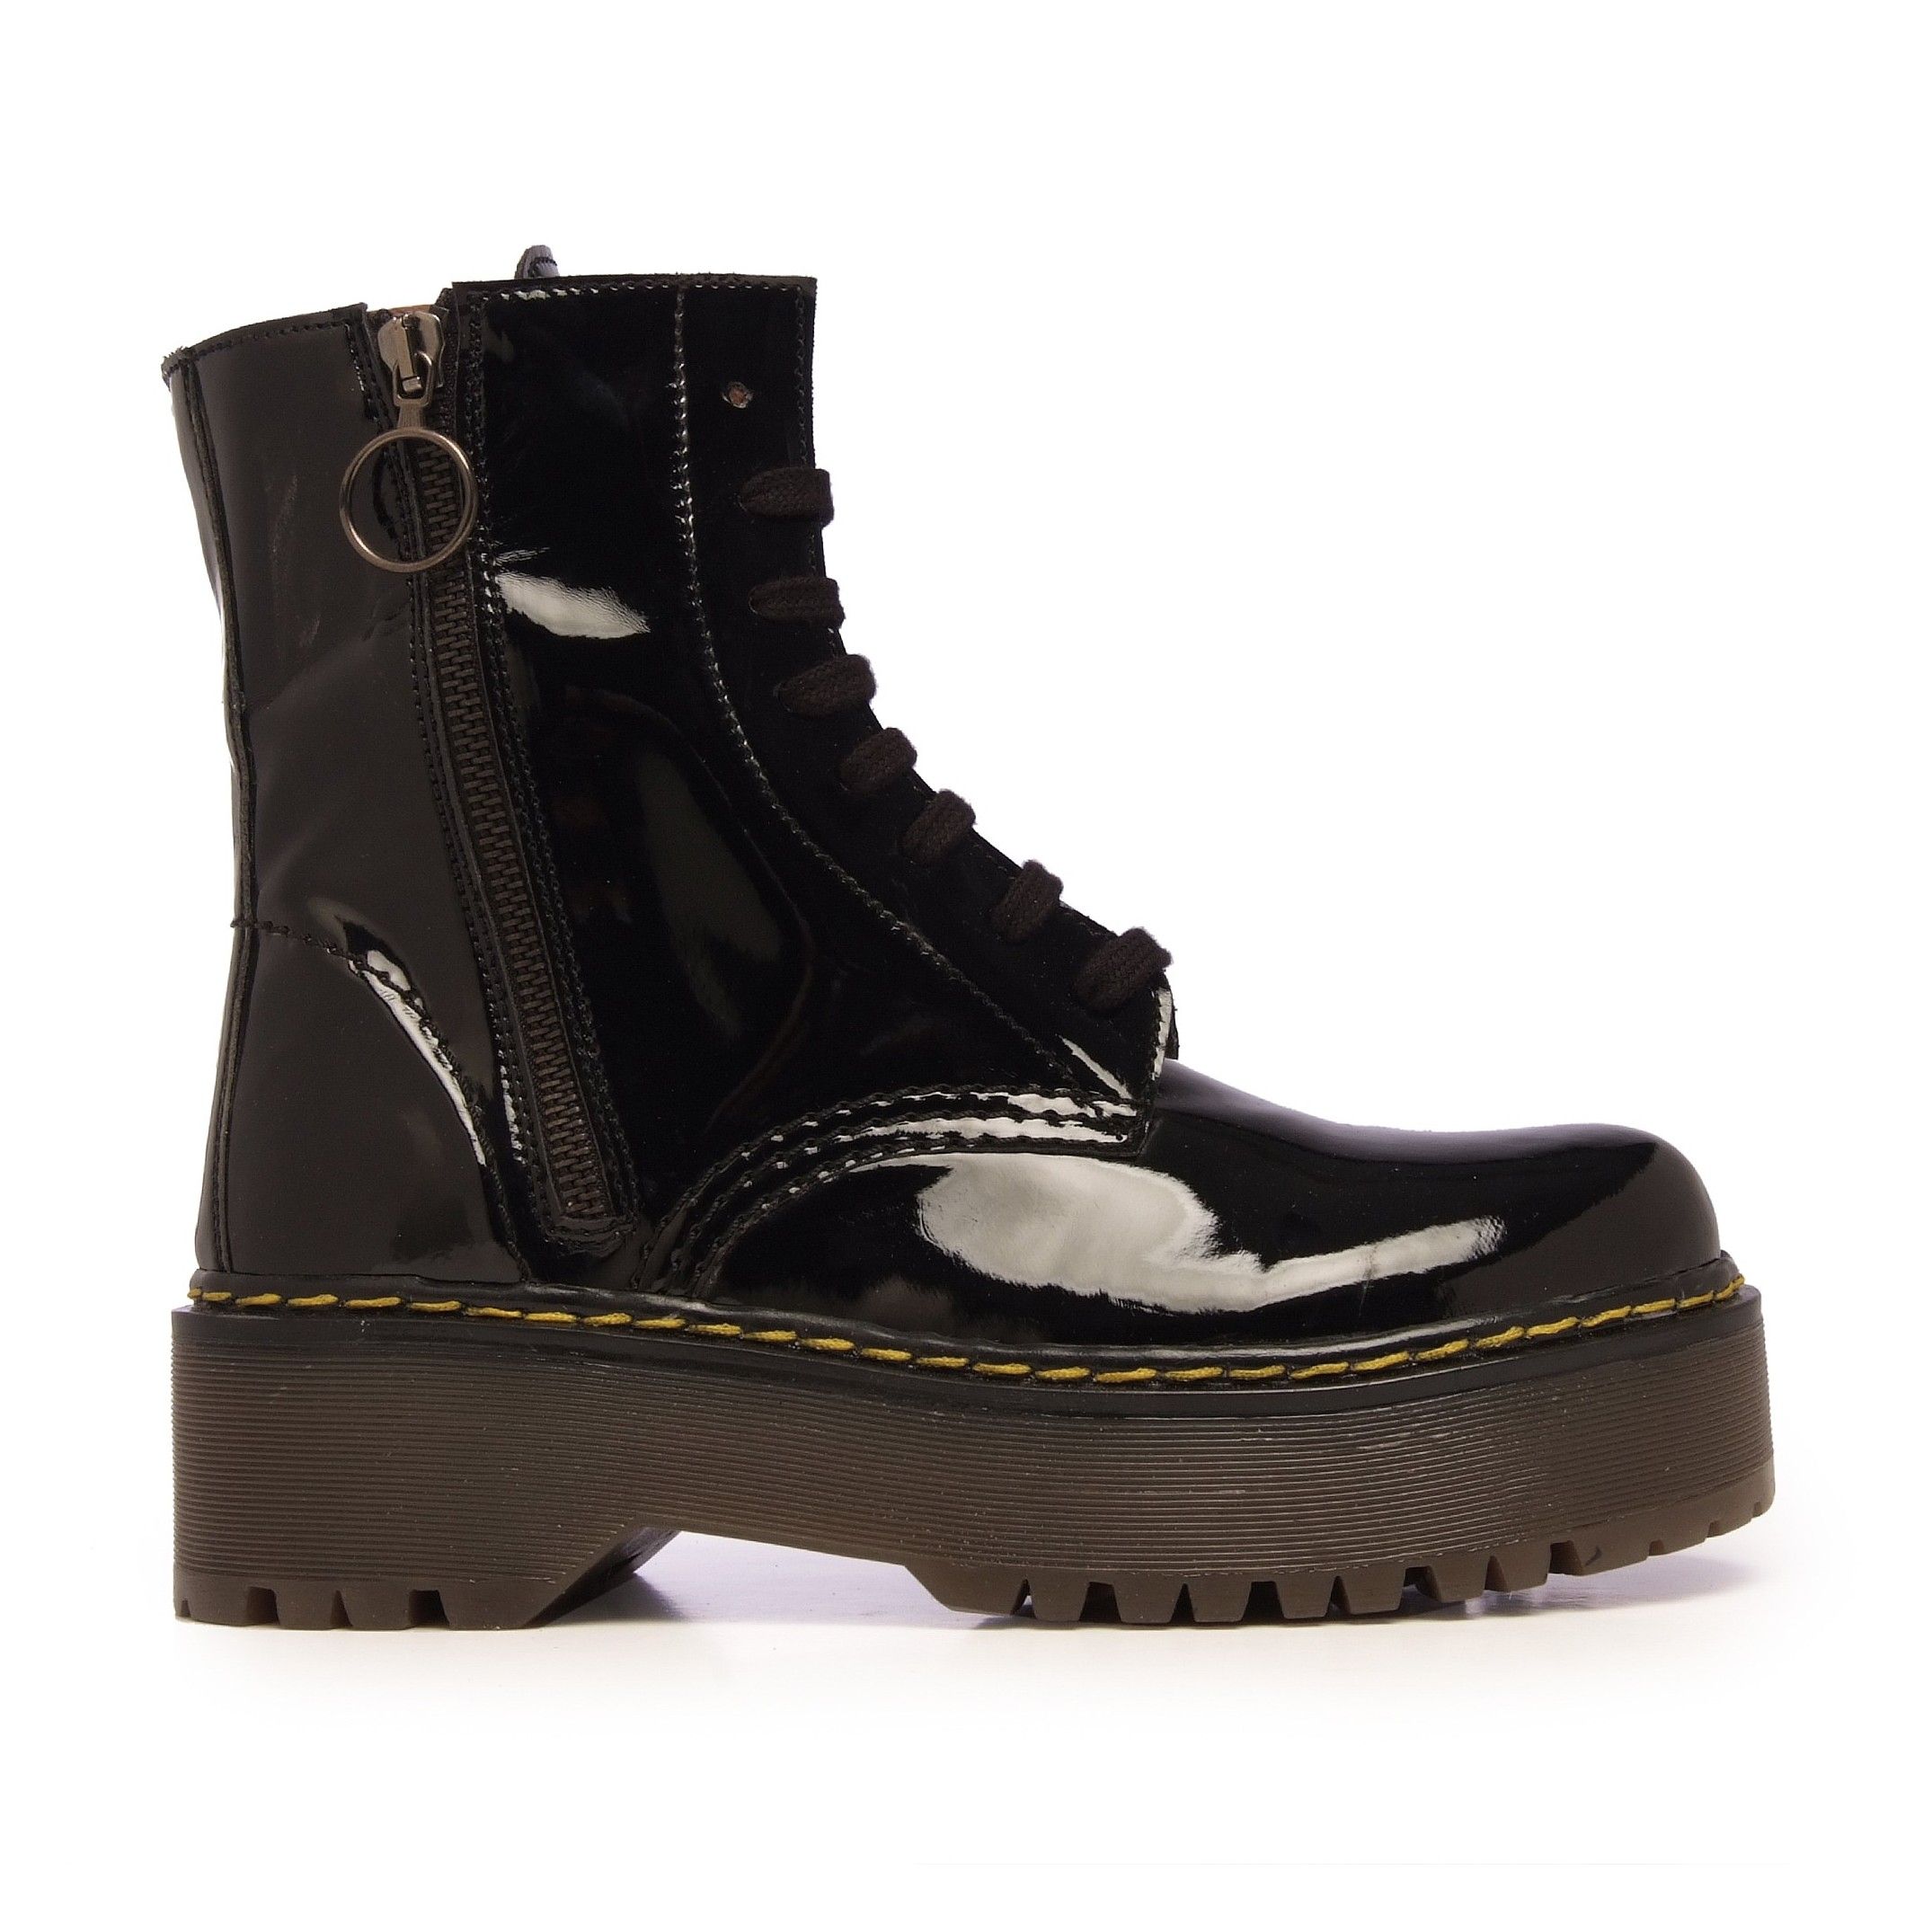 Patent leather boots for women. Laces and zipper closure. Platform: 3 cm. Heel: 5 cm. Made in Spain.